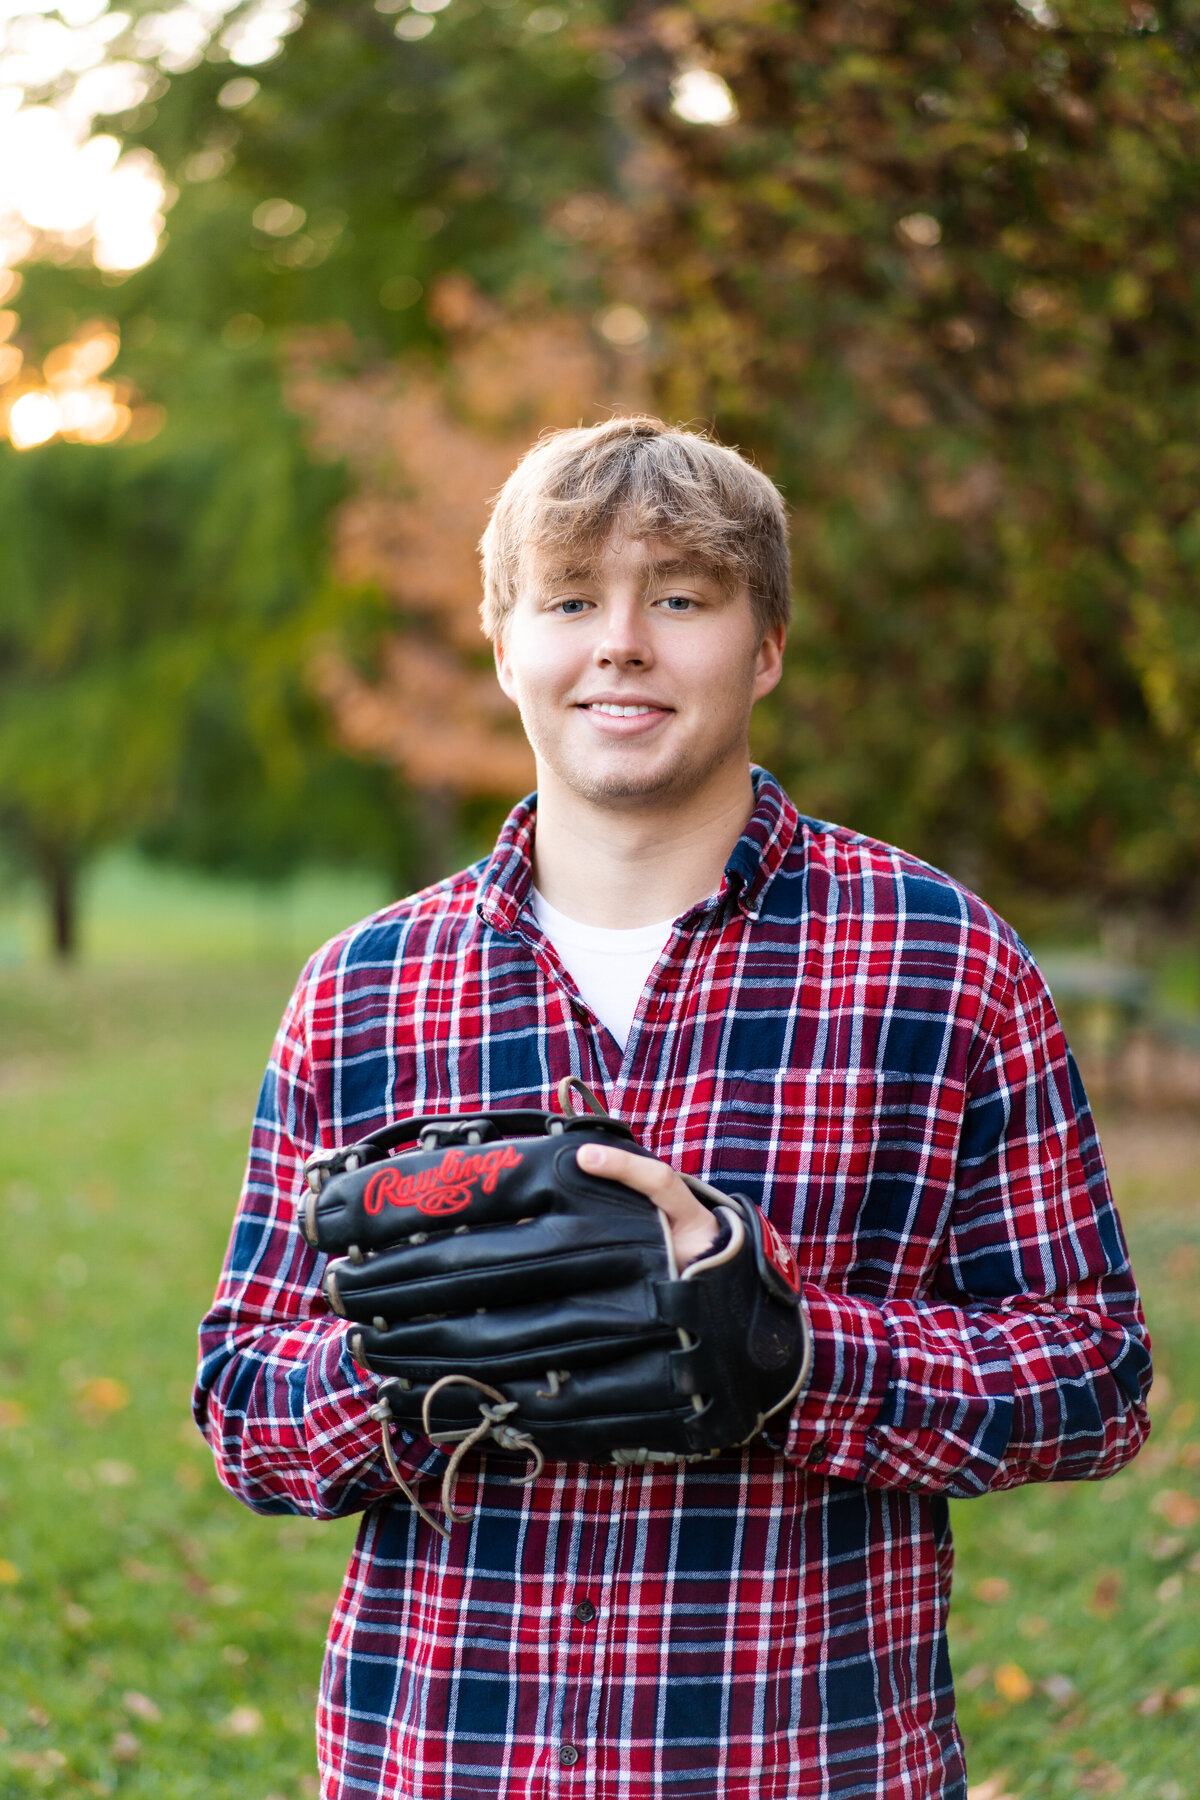 Senior Jacob Kowalczyk poses with a baseball glove in front of colorful trees at Jeffrey Mansion in Columbus Ohio.